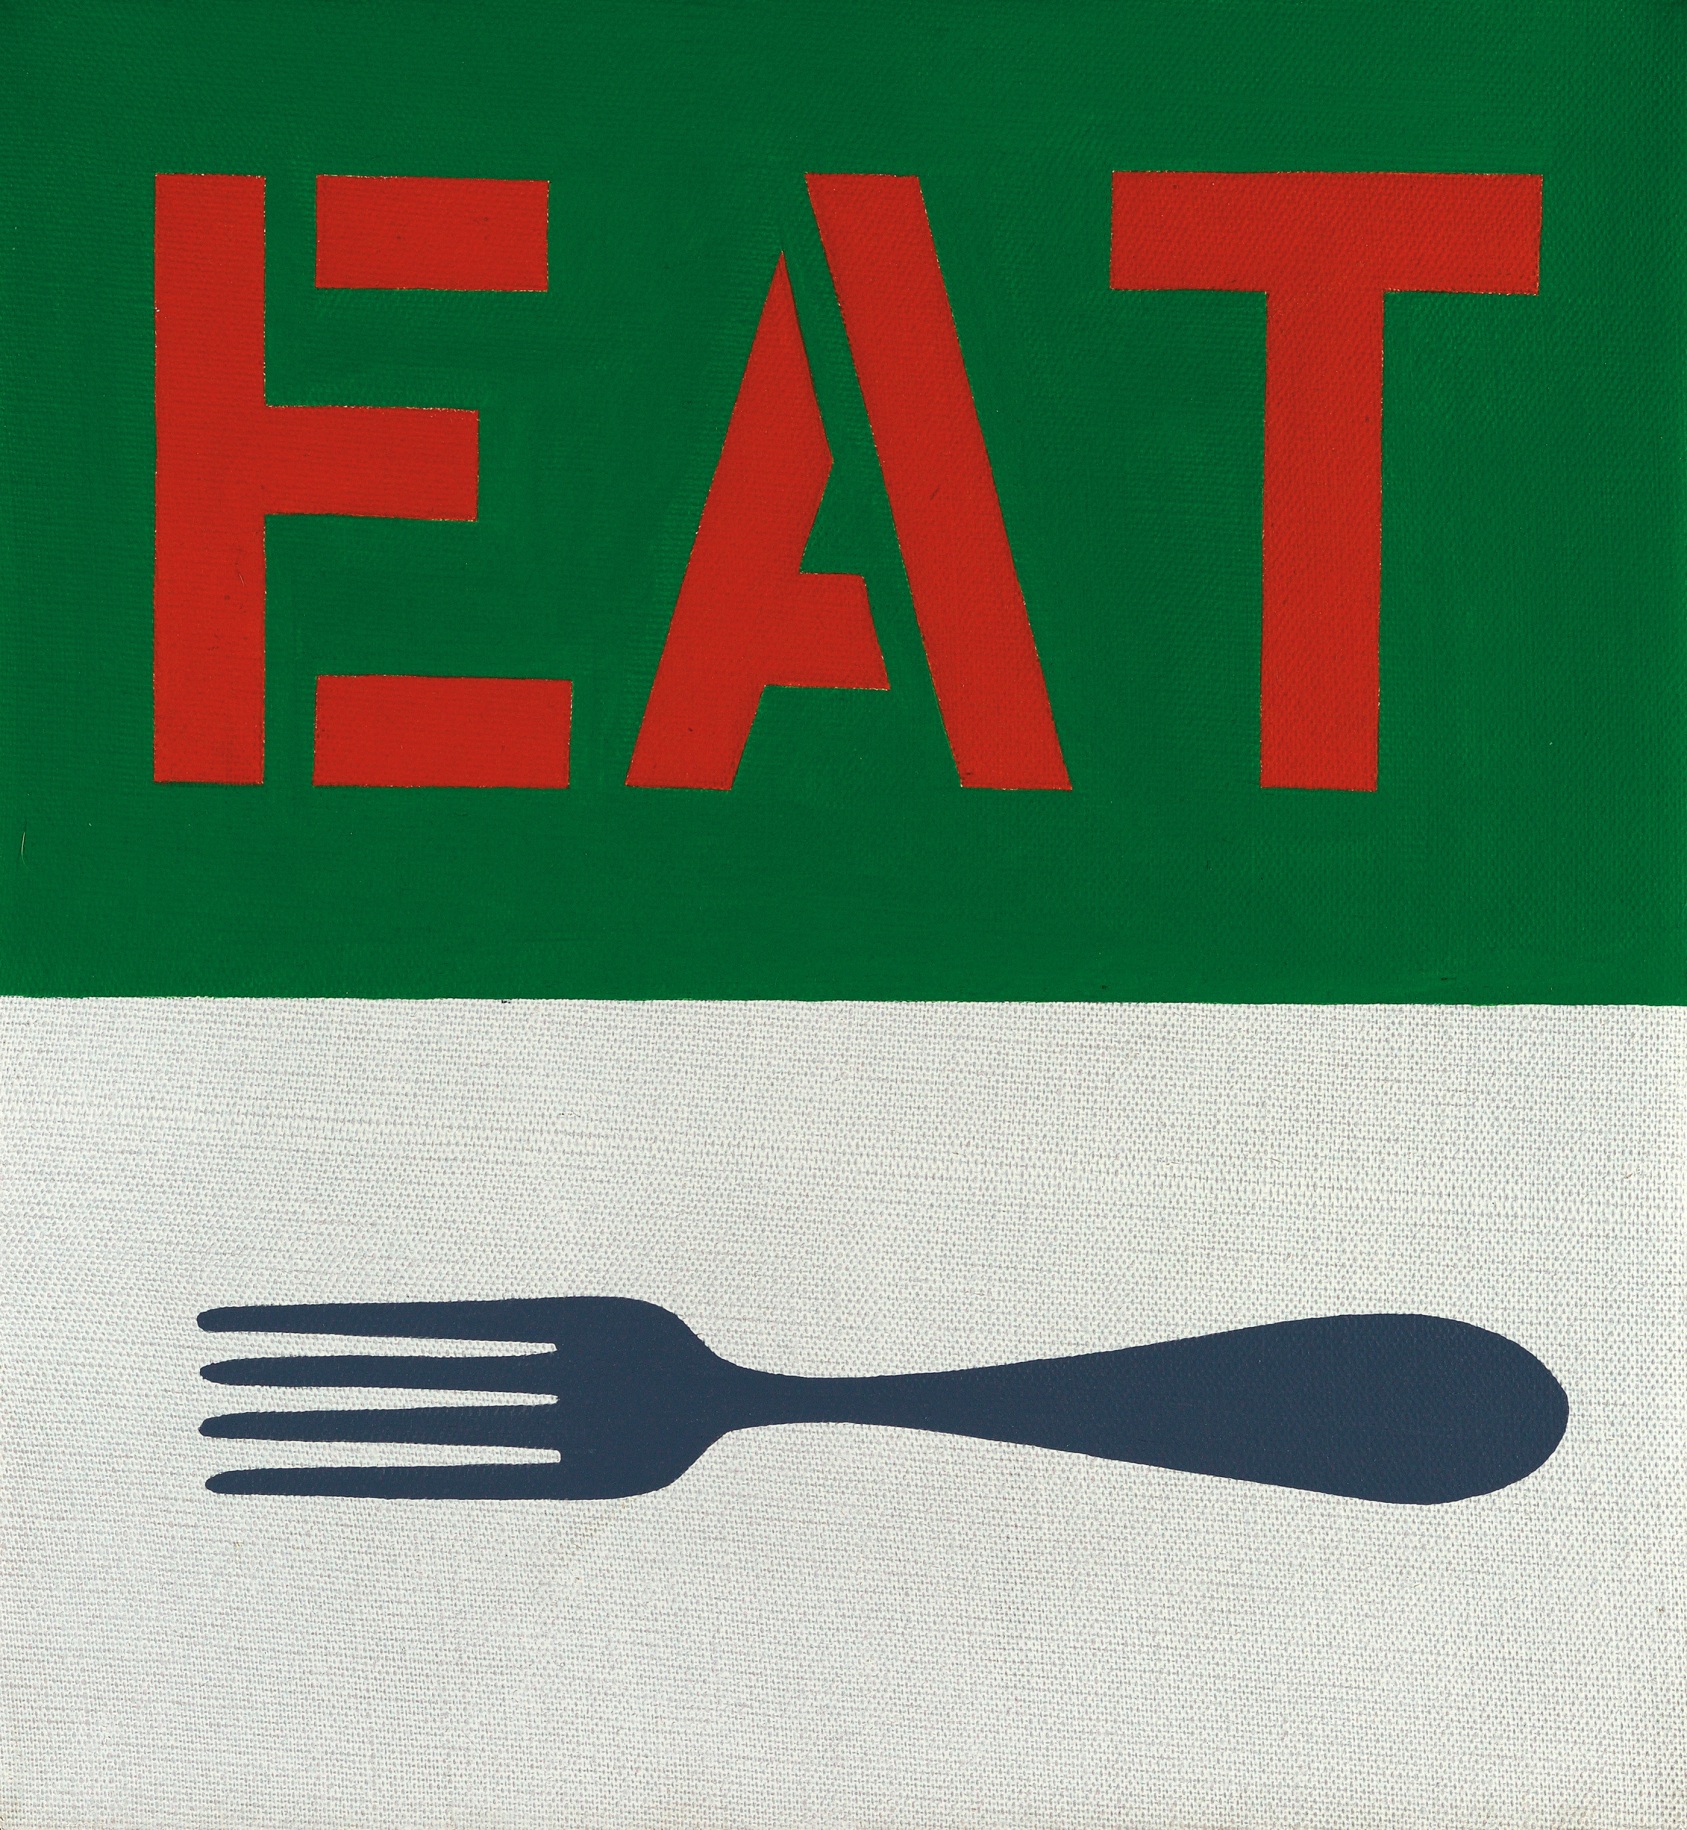 Fork is a small canvas, the upper half contains red stenciled letters spelling Eat on a green background. The bottom half of the canvas is white and contains a black fork with the tines facing to the left.